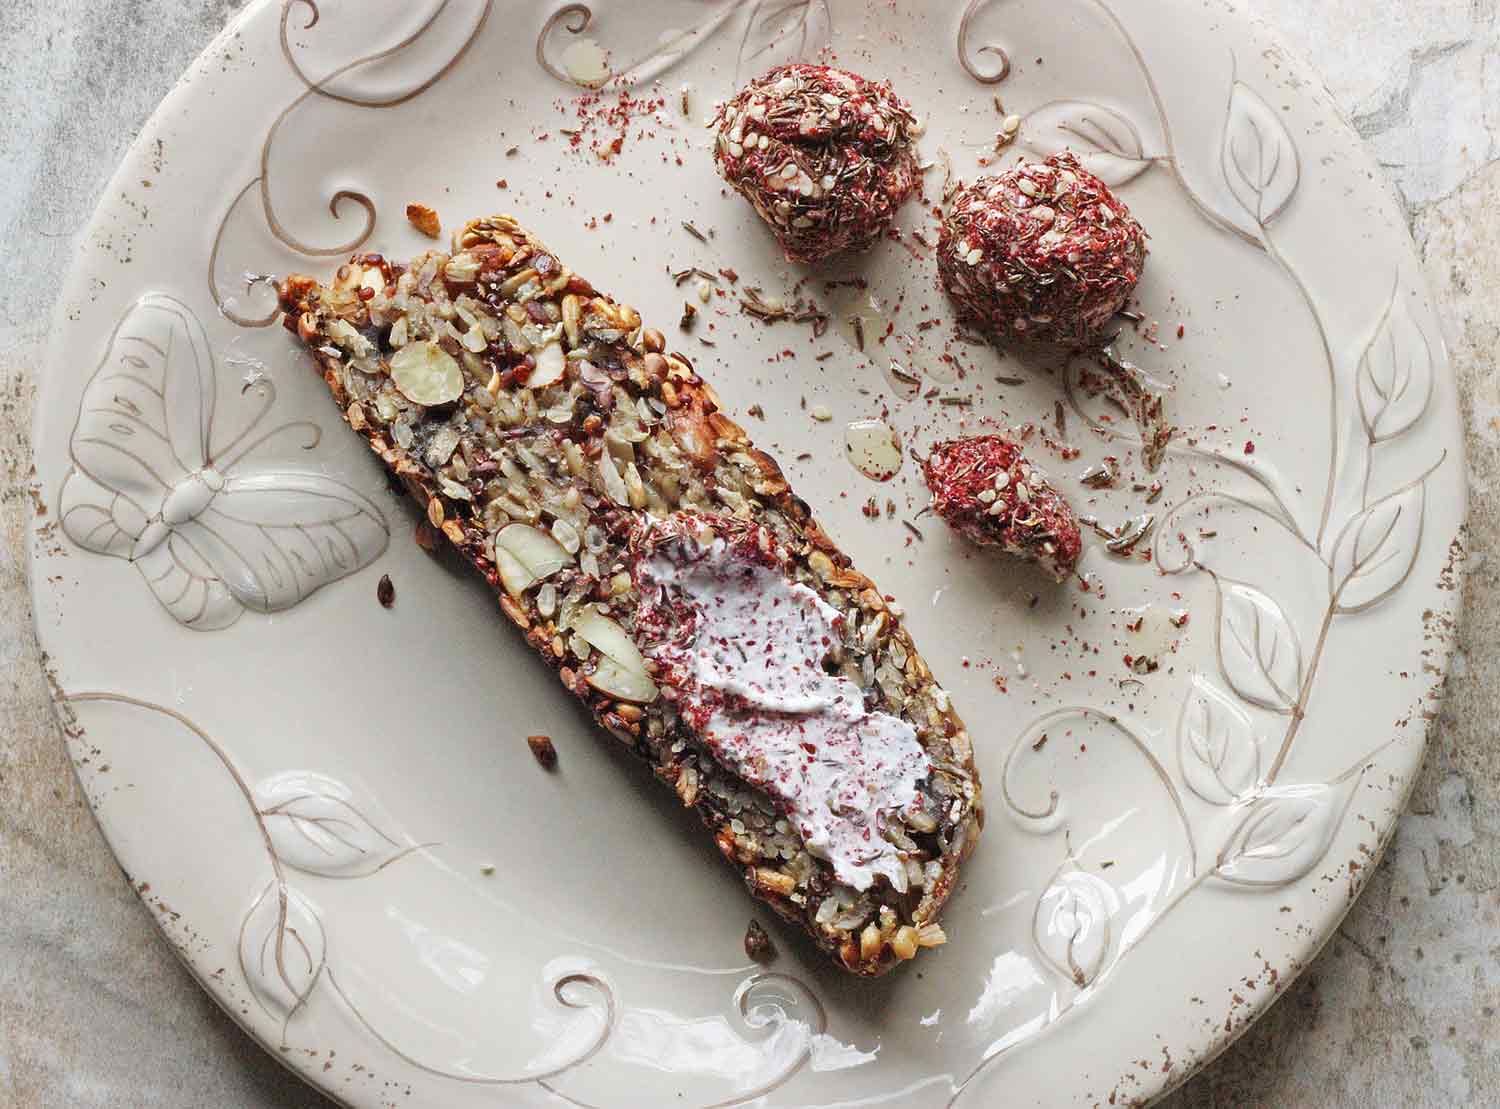 A slice of Seed & Nut Loaf spread with labneh and sprinkled with za'atar.